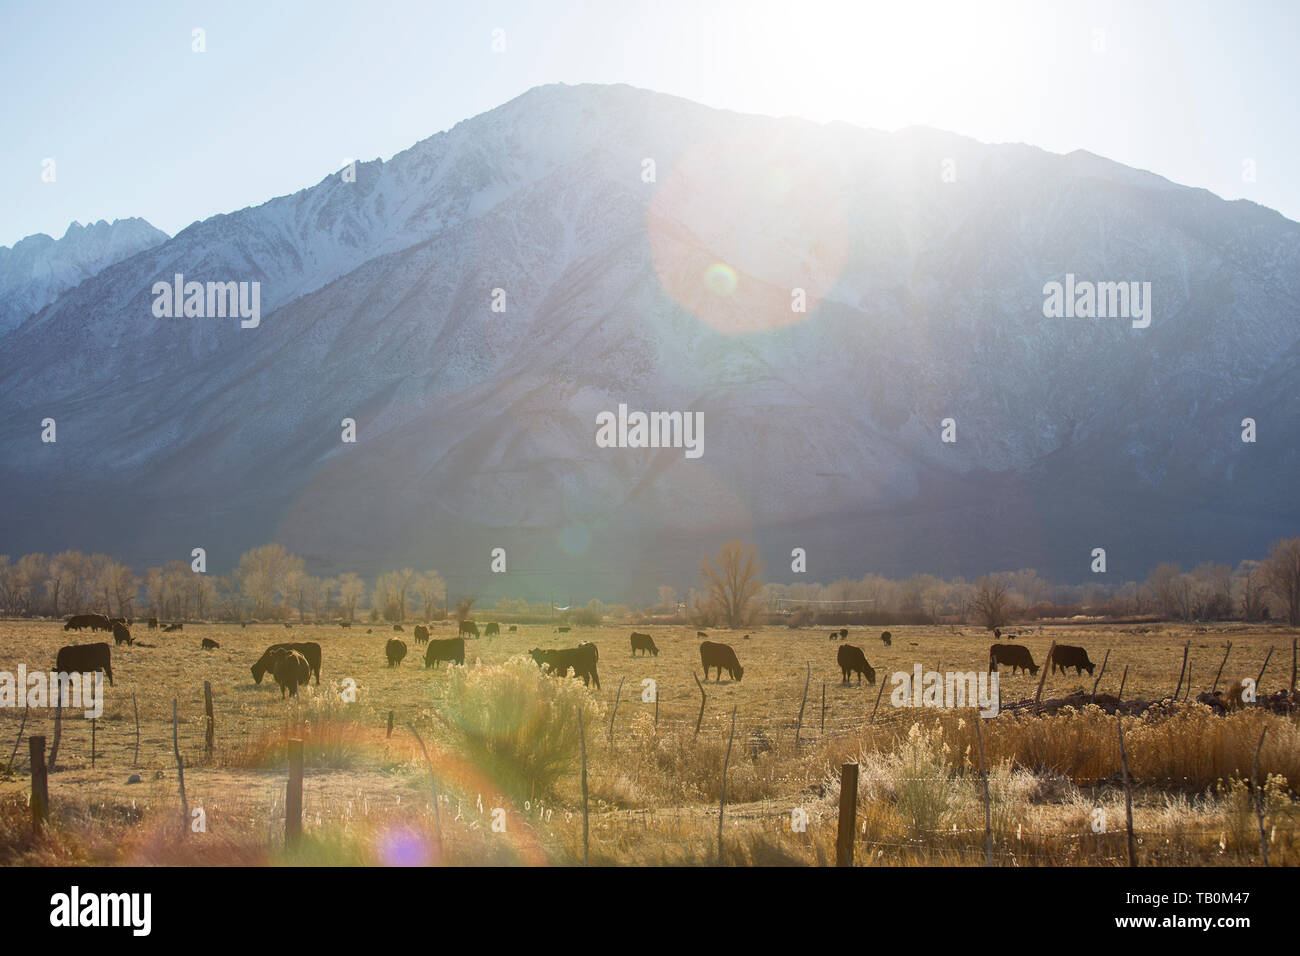 Cows graze in field in front of snow covered mountain, sun flare over scene. Stock Photo